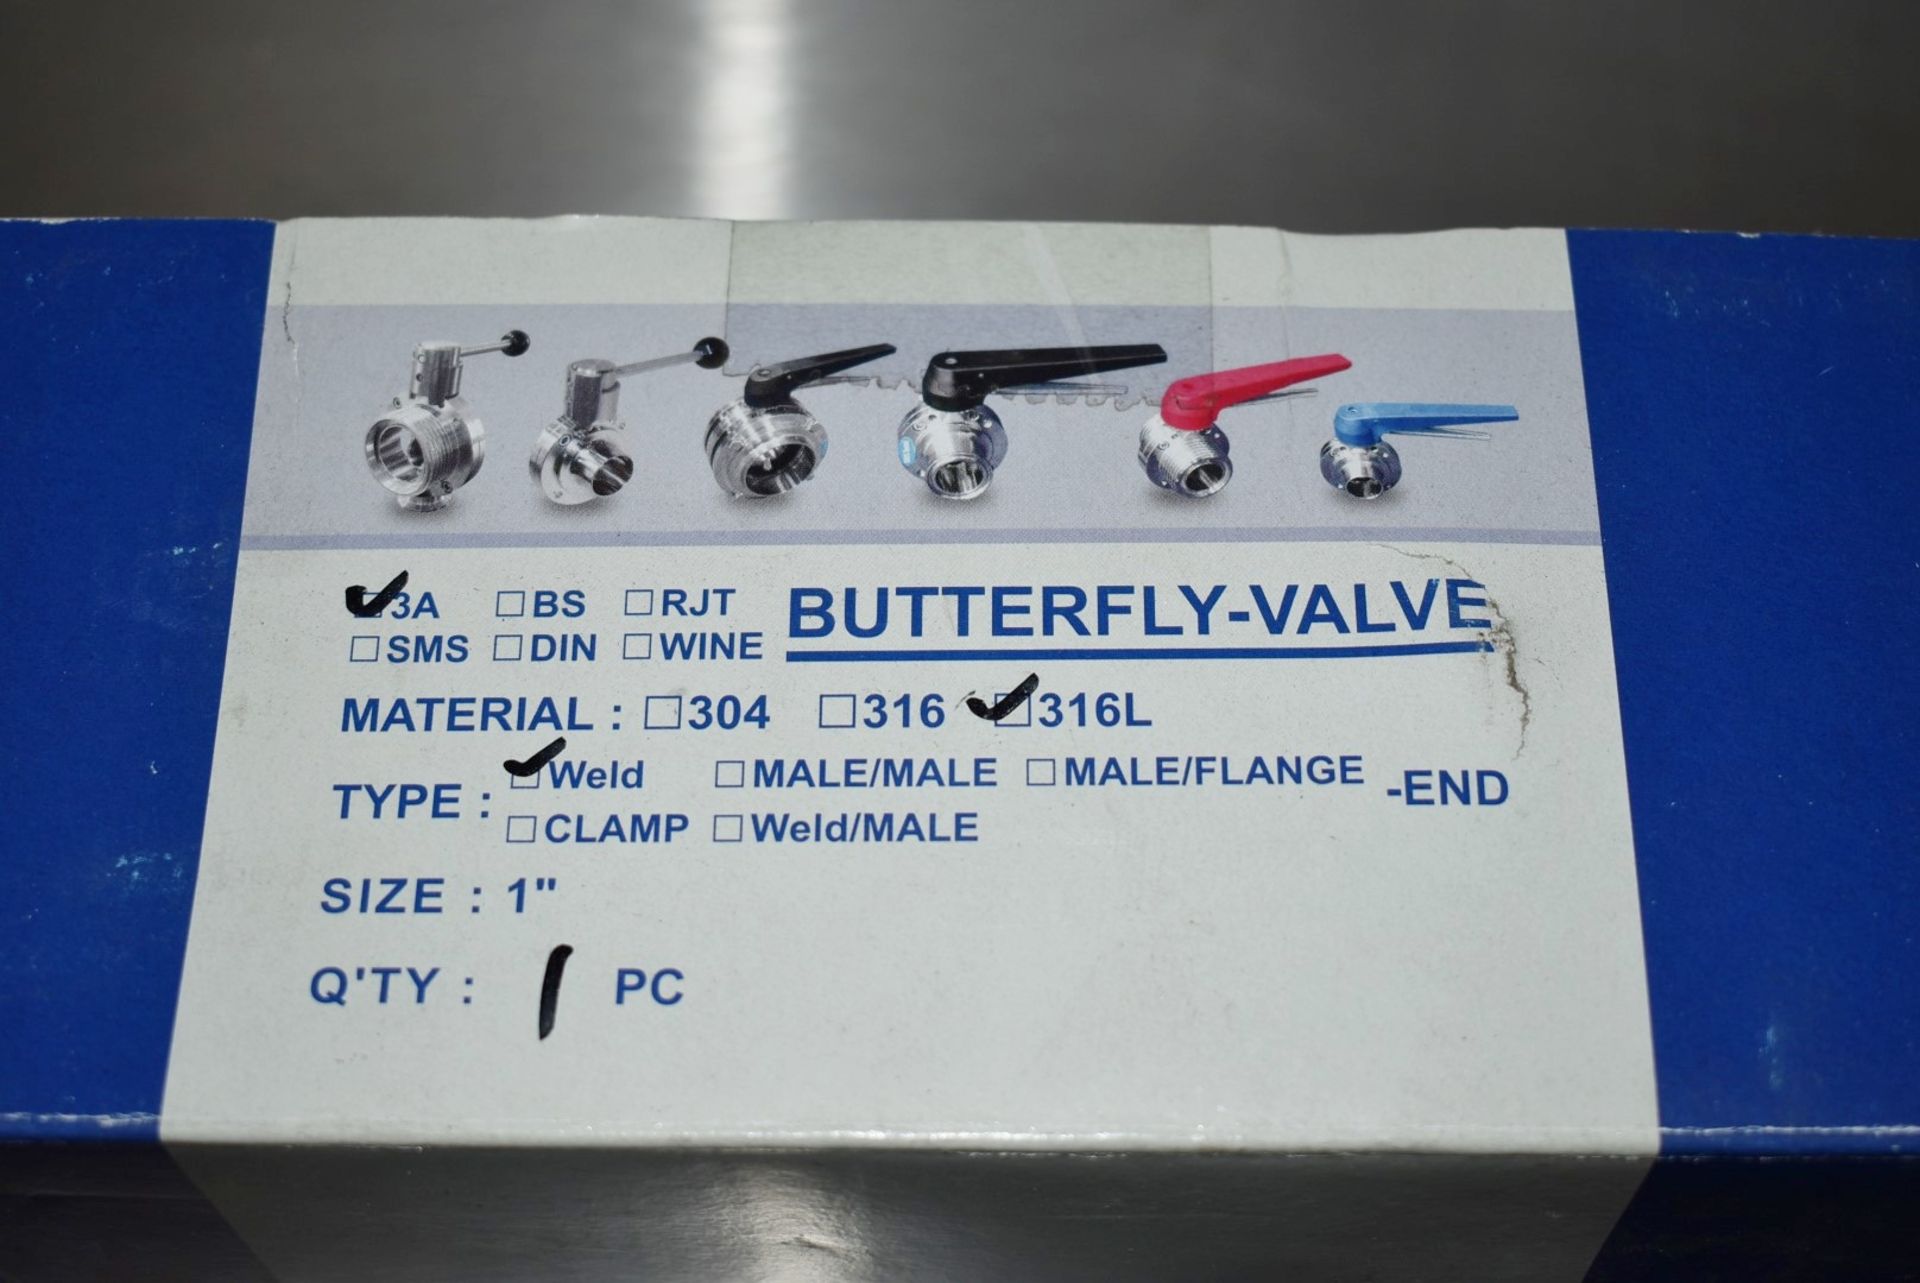 1 x Butterfly Valve - New in Original Box - Model: 3A - Material: 316L - Type: Weld - Size: 1 Inch - - Image 4 of 5